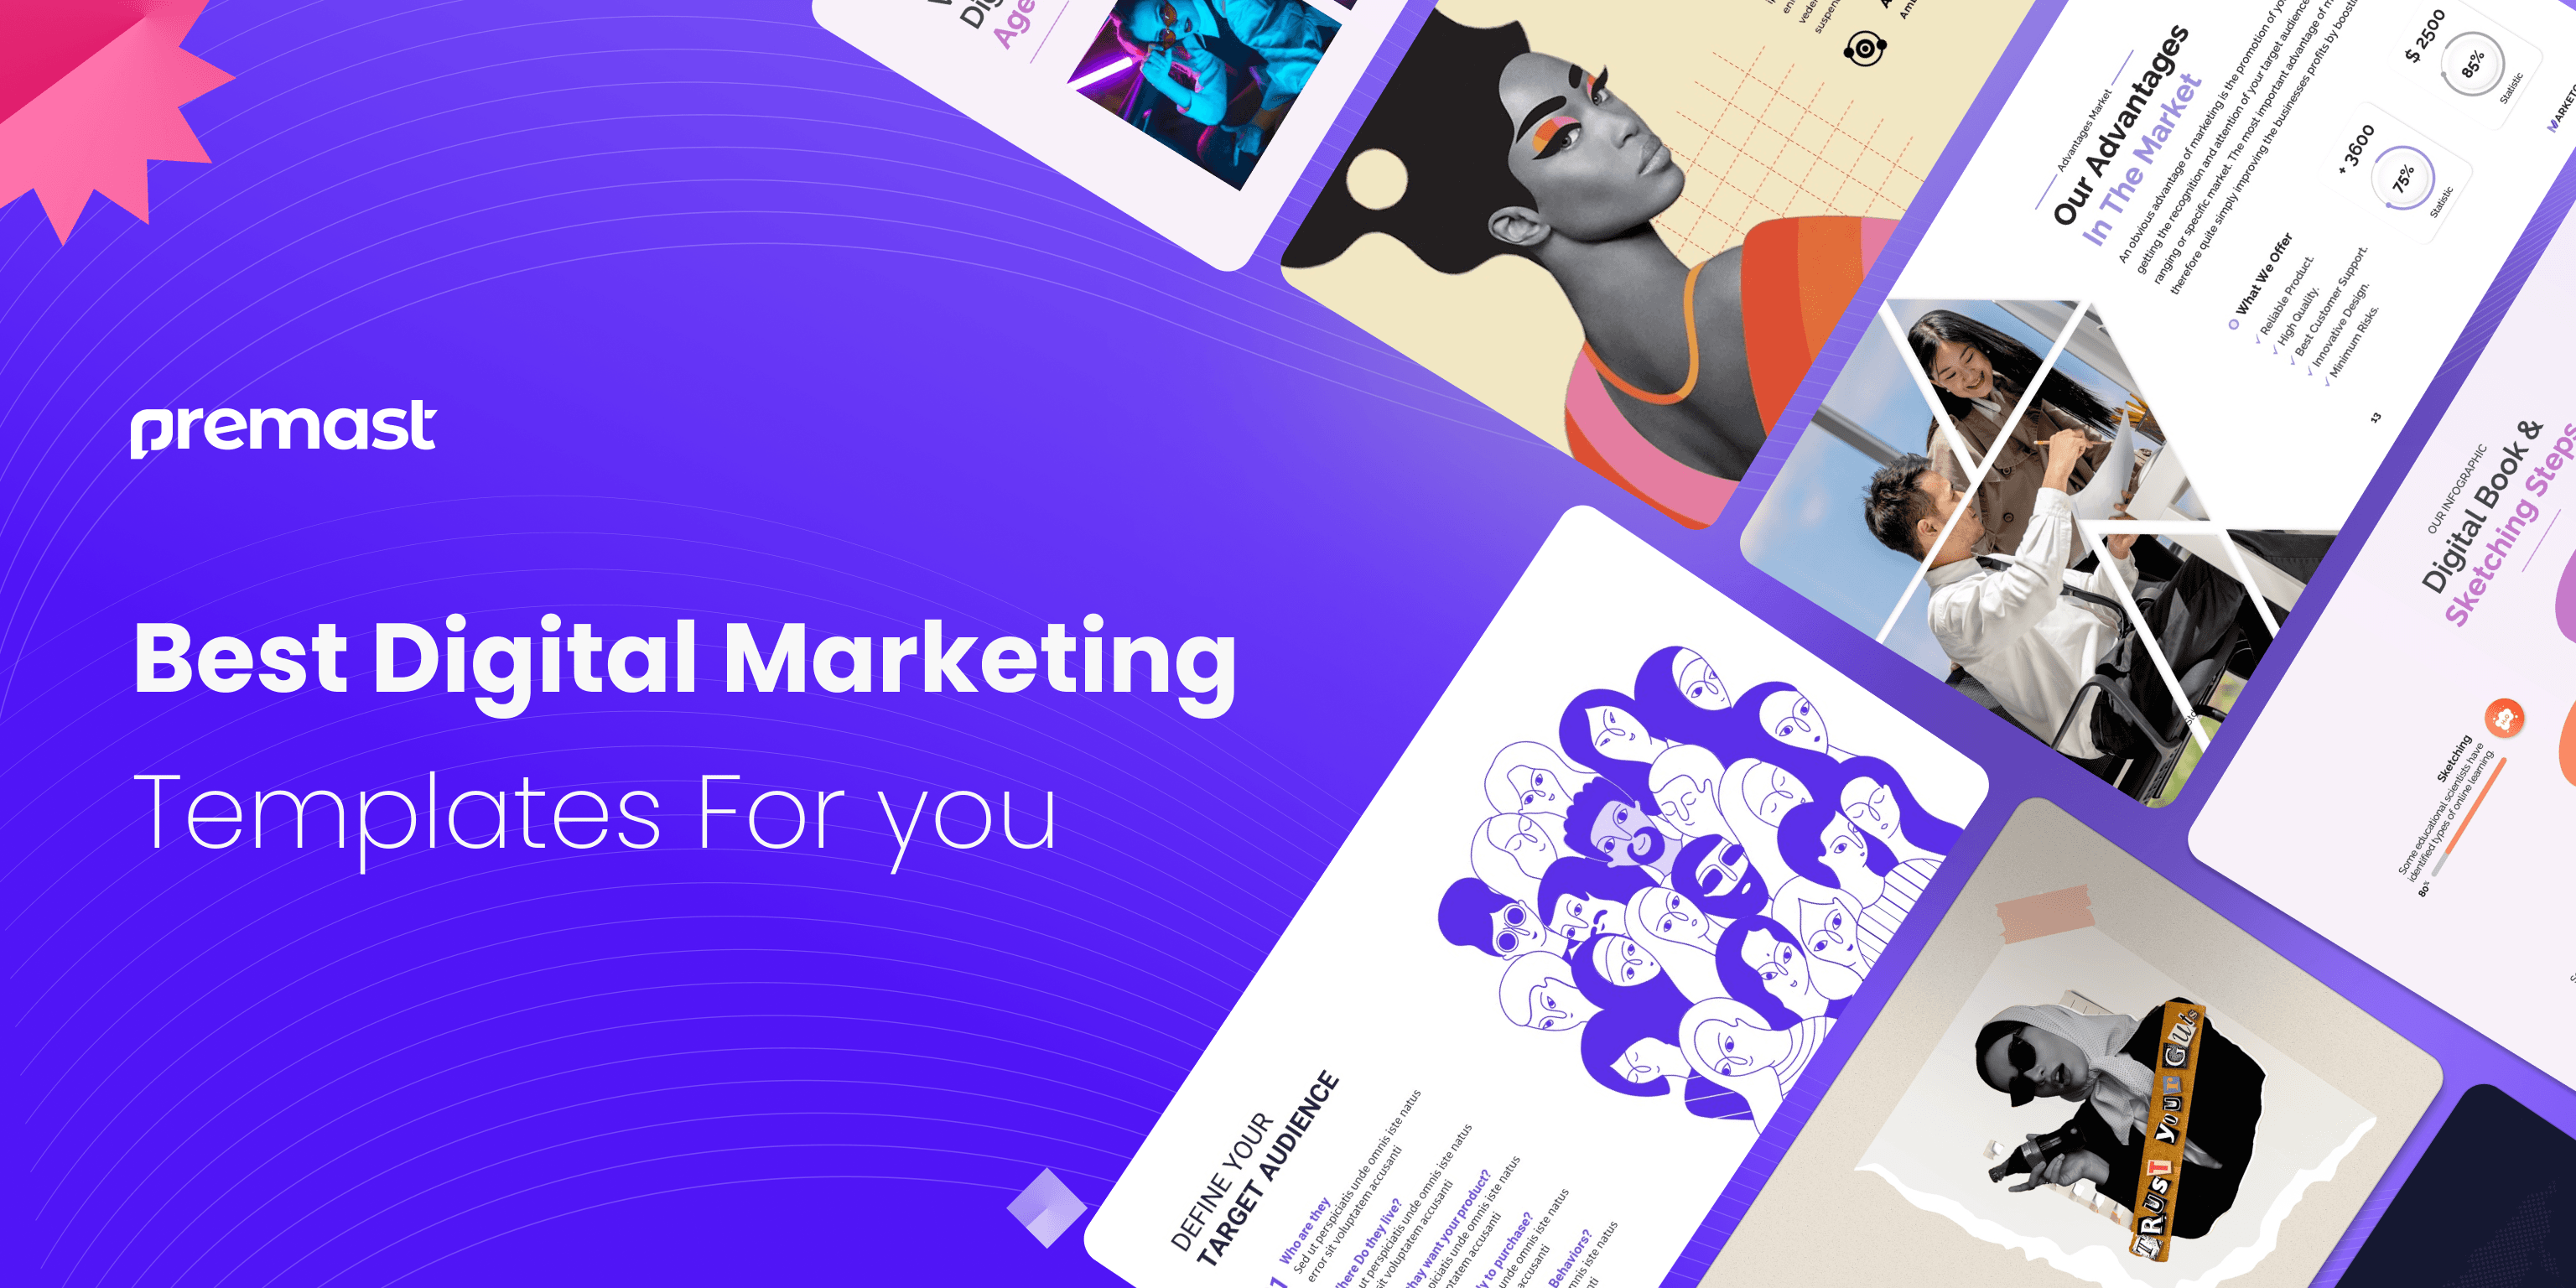 Best Digital Marketing Templates for Your Business.